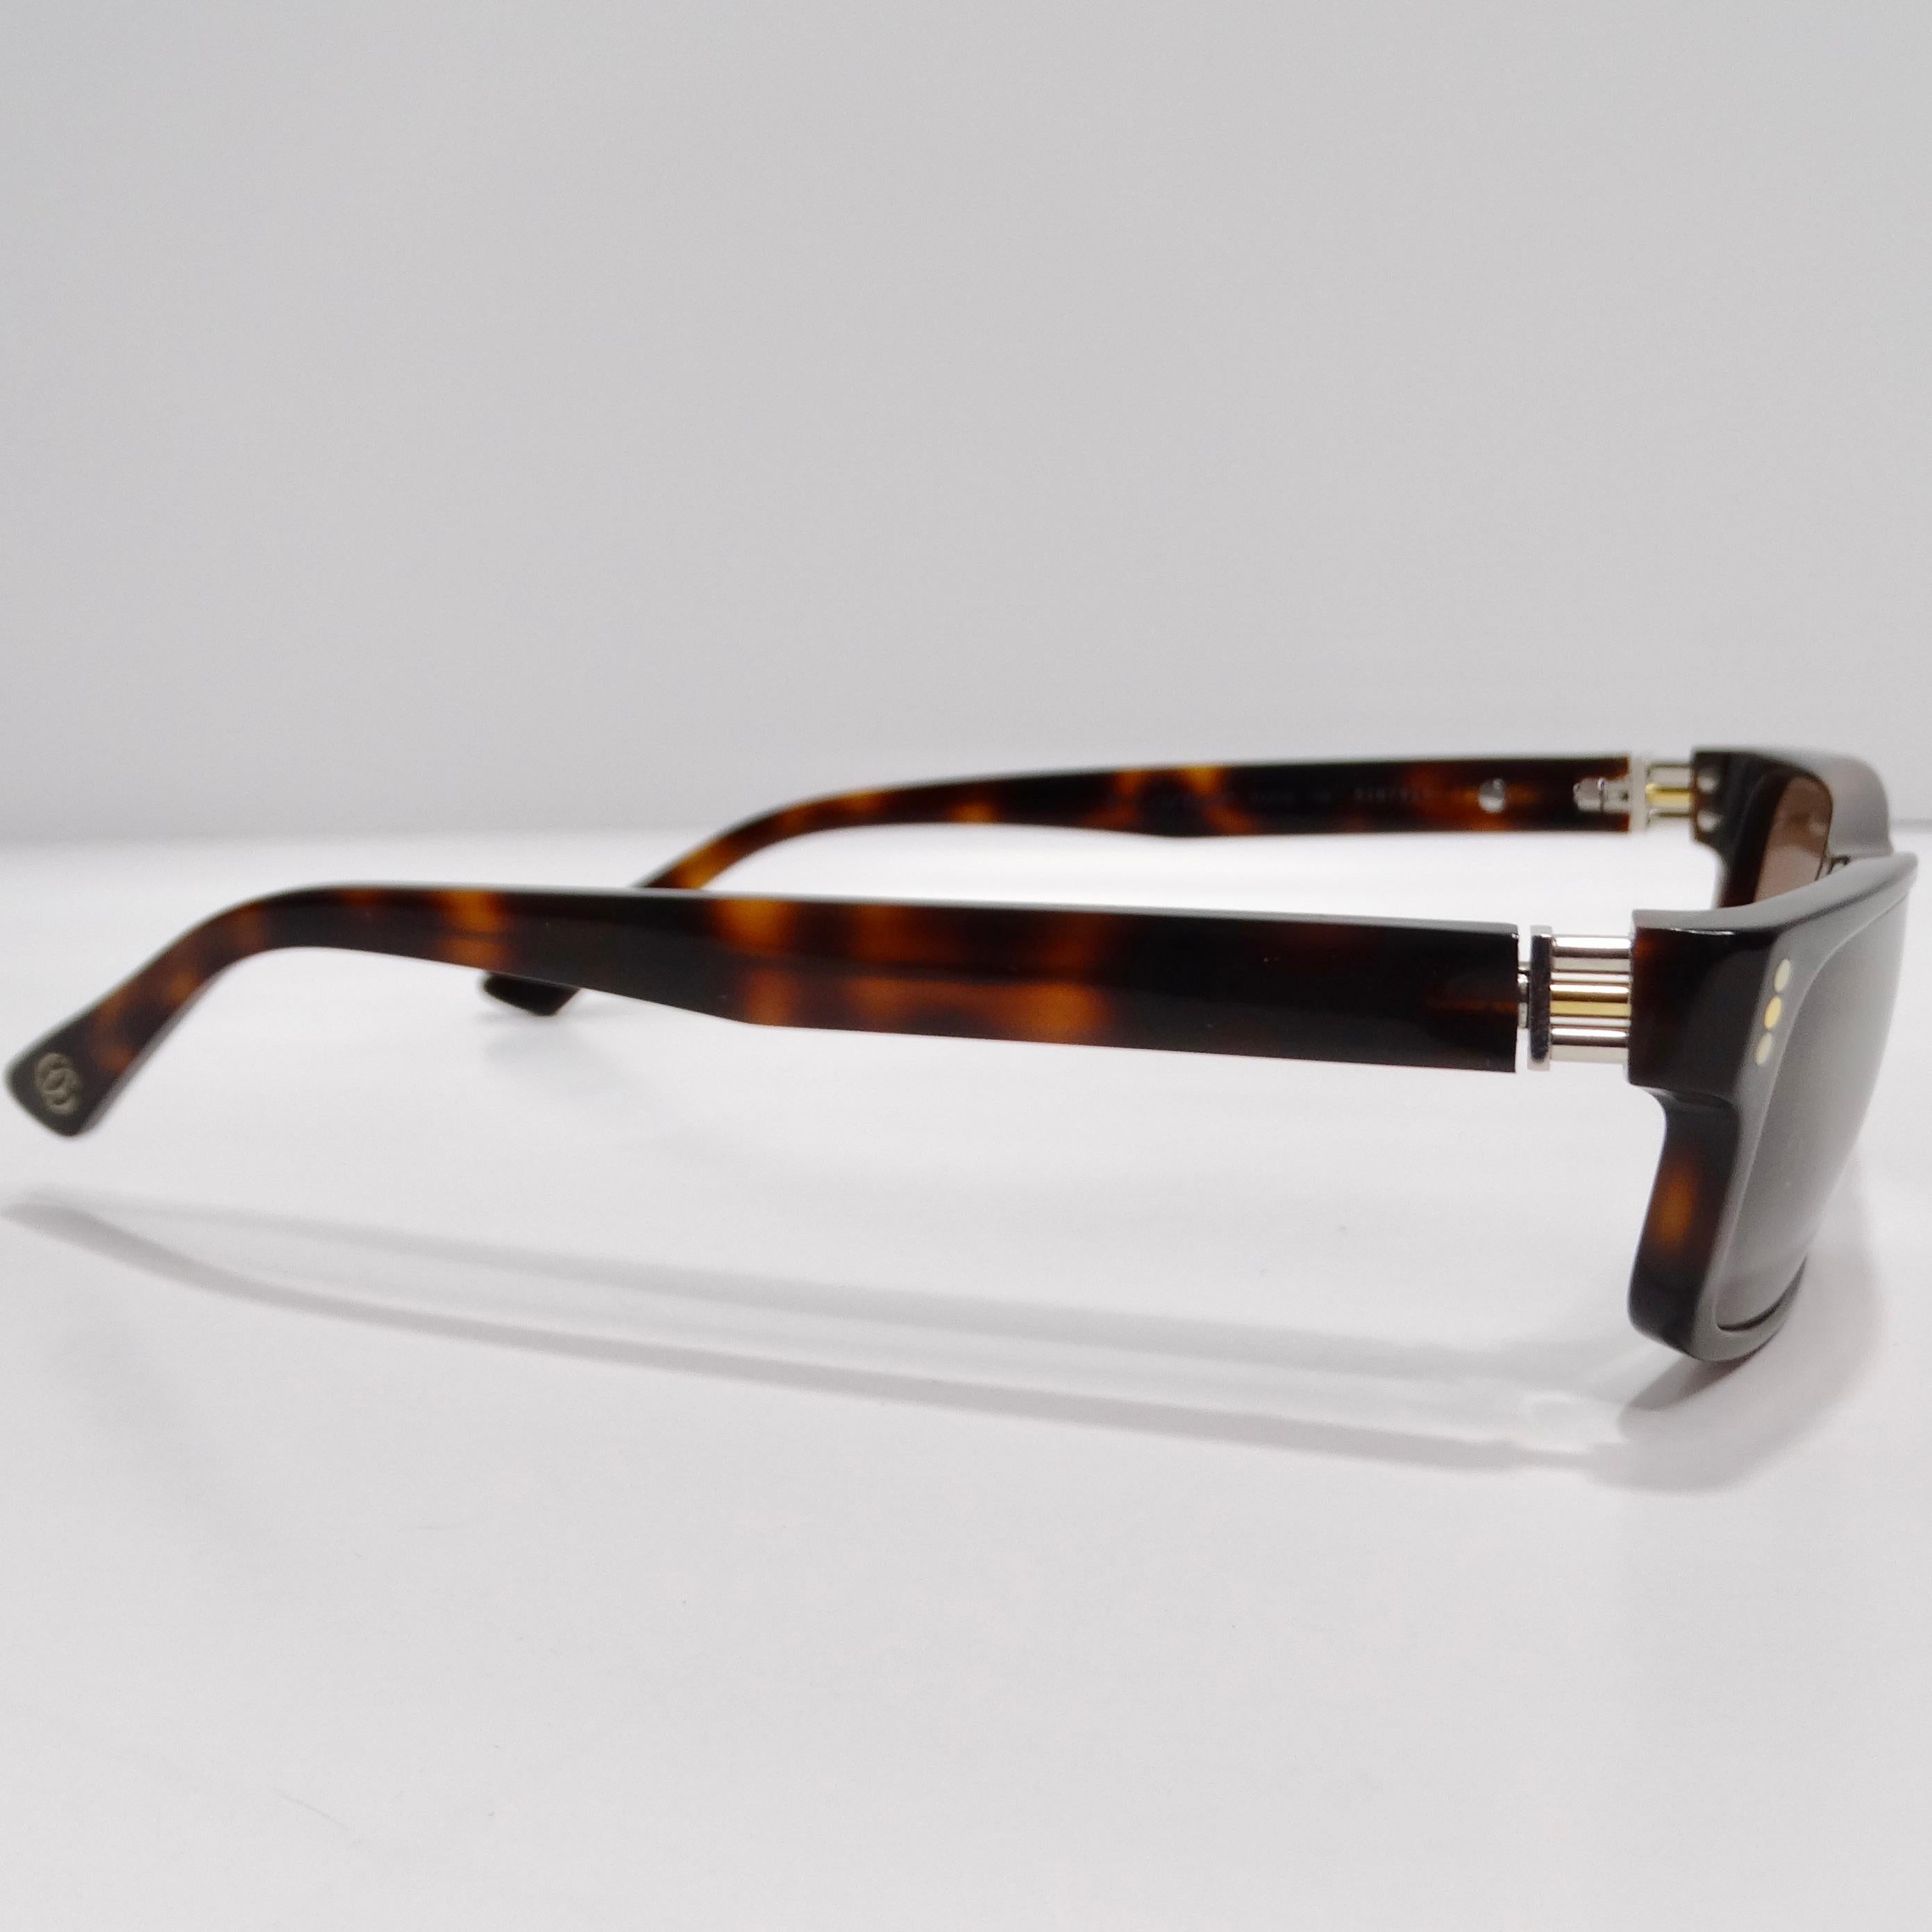 Indulge in timeless elegance with these Cartier 1990s Square Frame Tortoise Shell Sunglasses. Crafted with meticulous attention to detail, these sunglasses exude sophistication and style.

The classic square frame design is complemented by brown